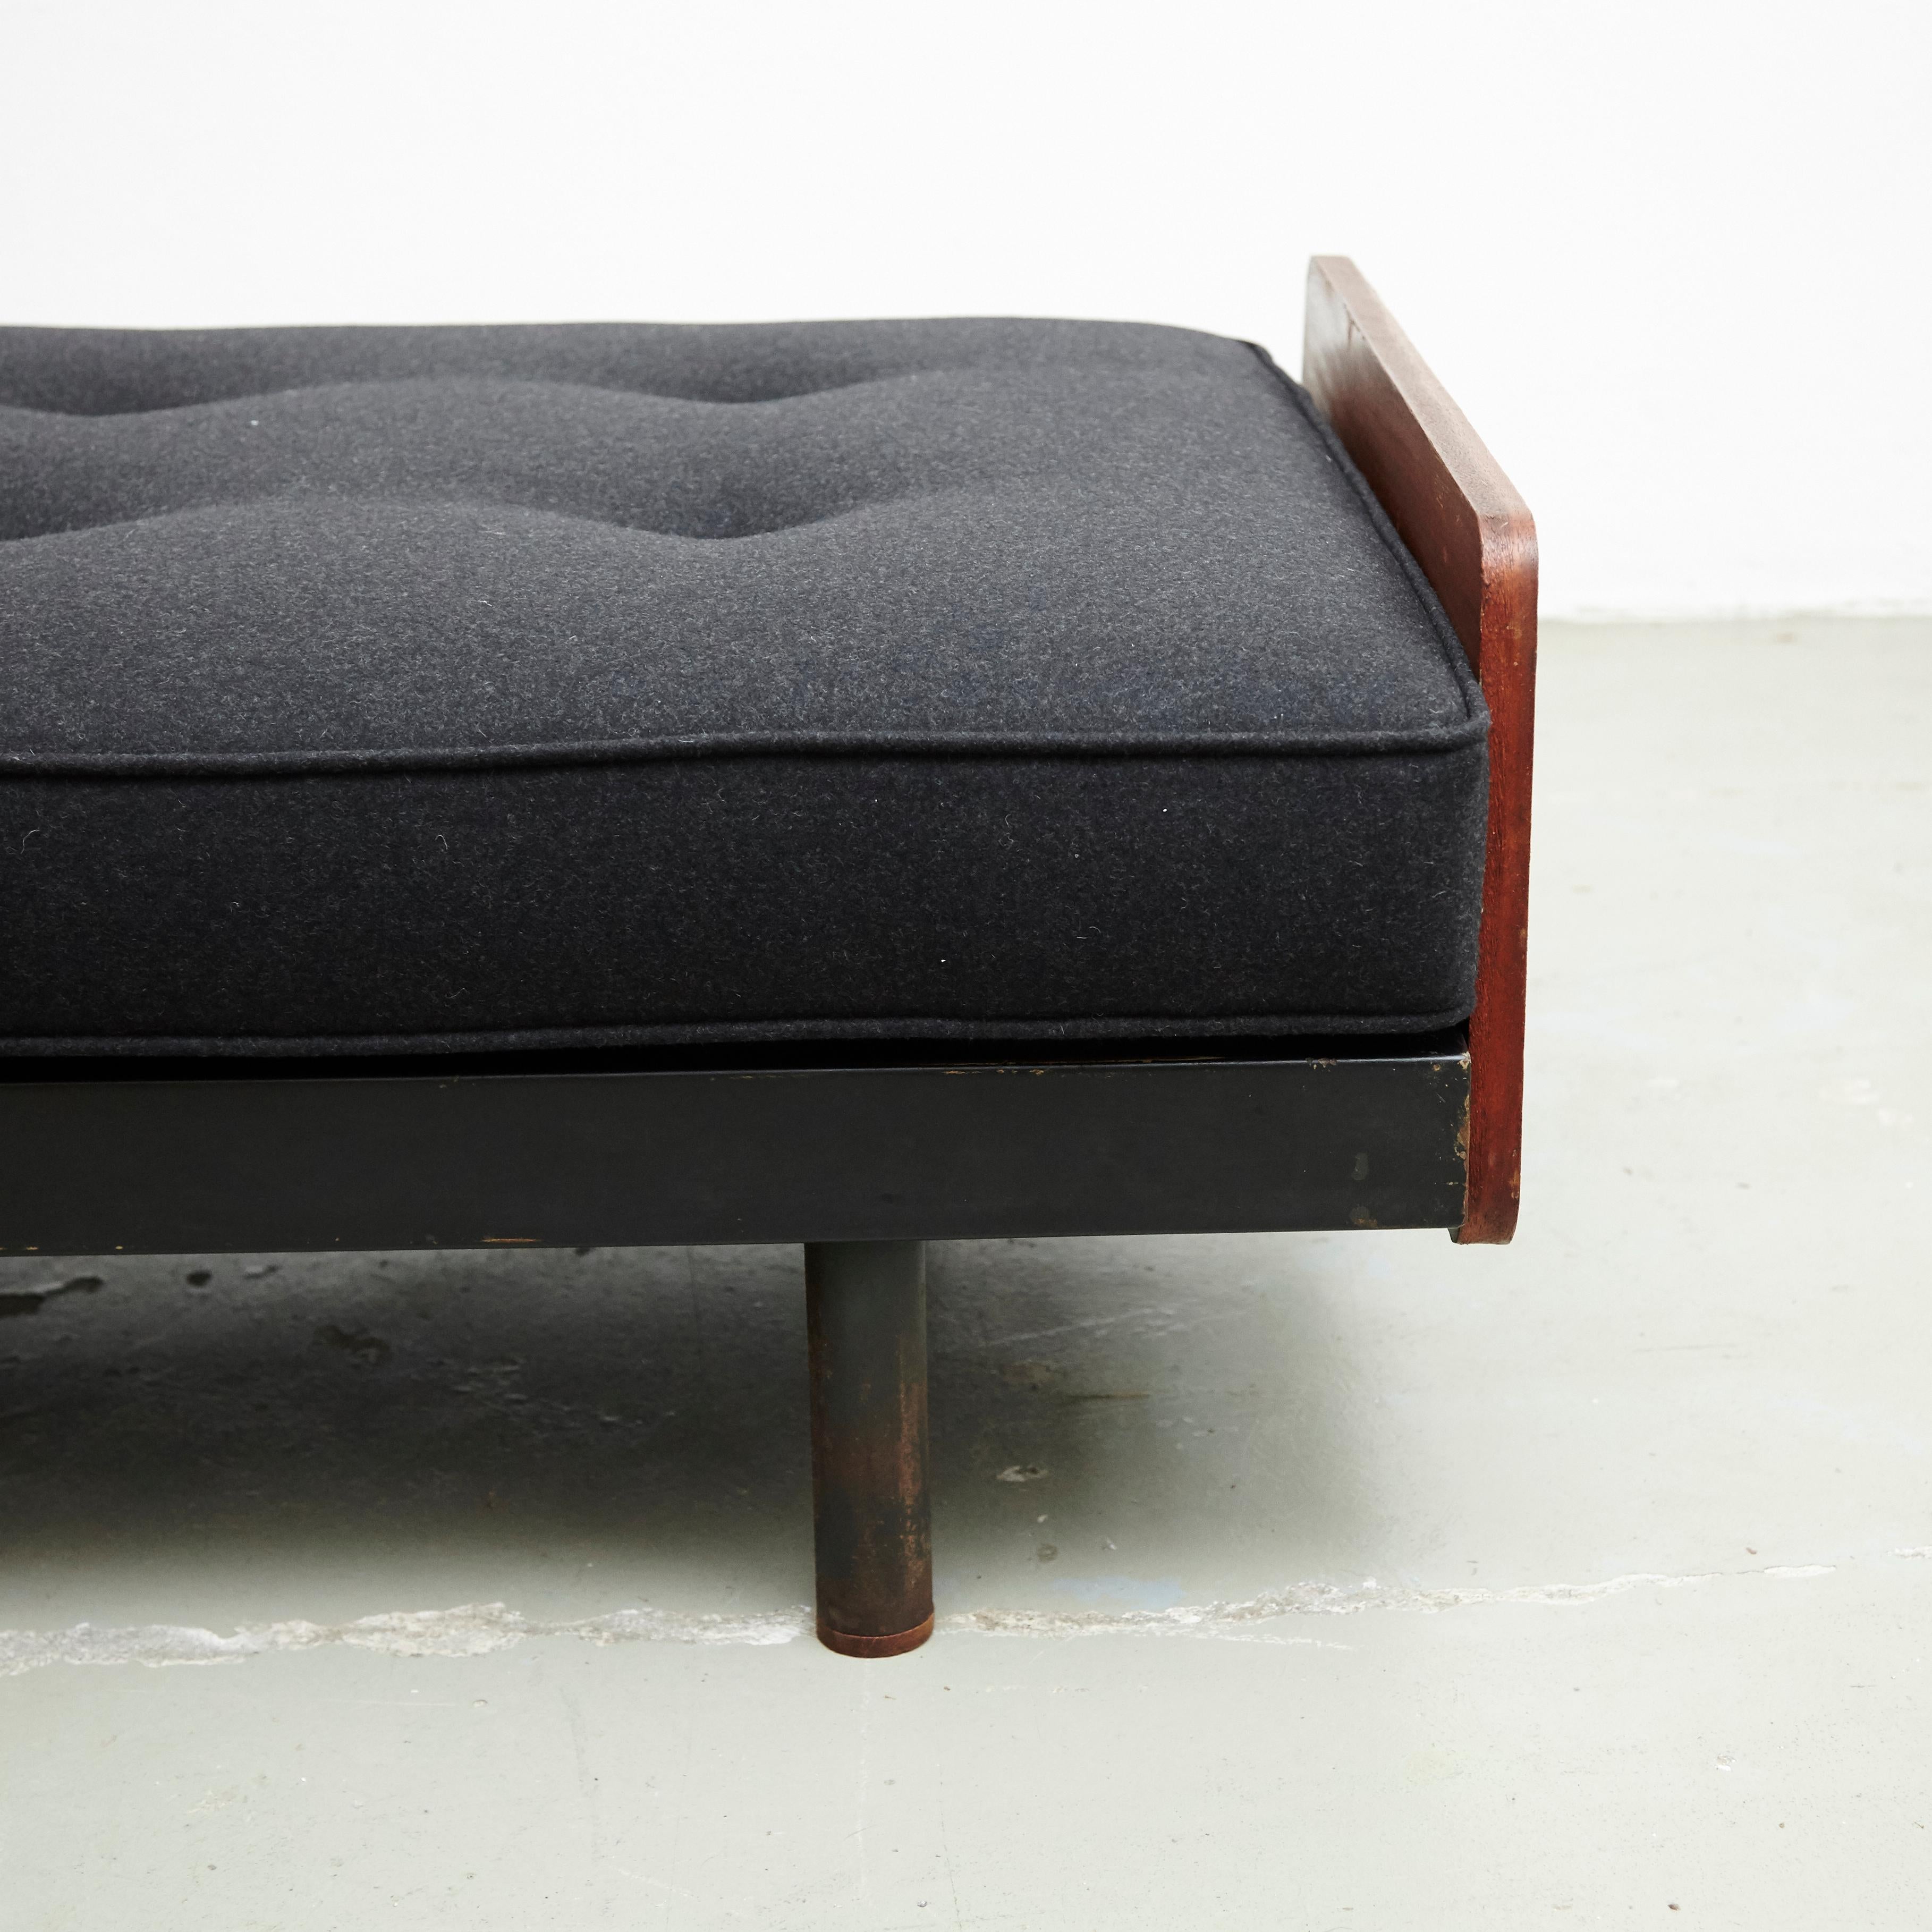 Jean Prouve Daybed in Black Metal and Wood, circa 1950 8